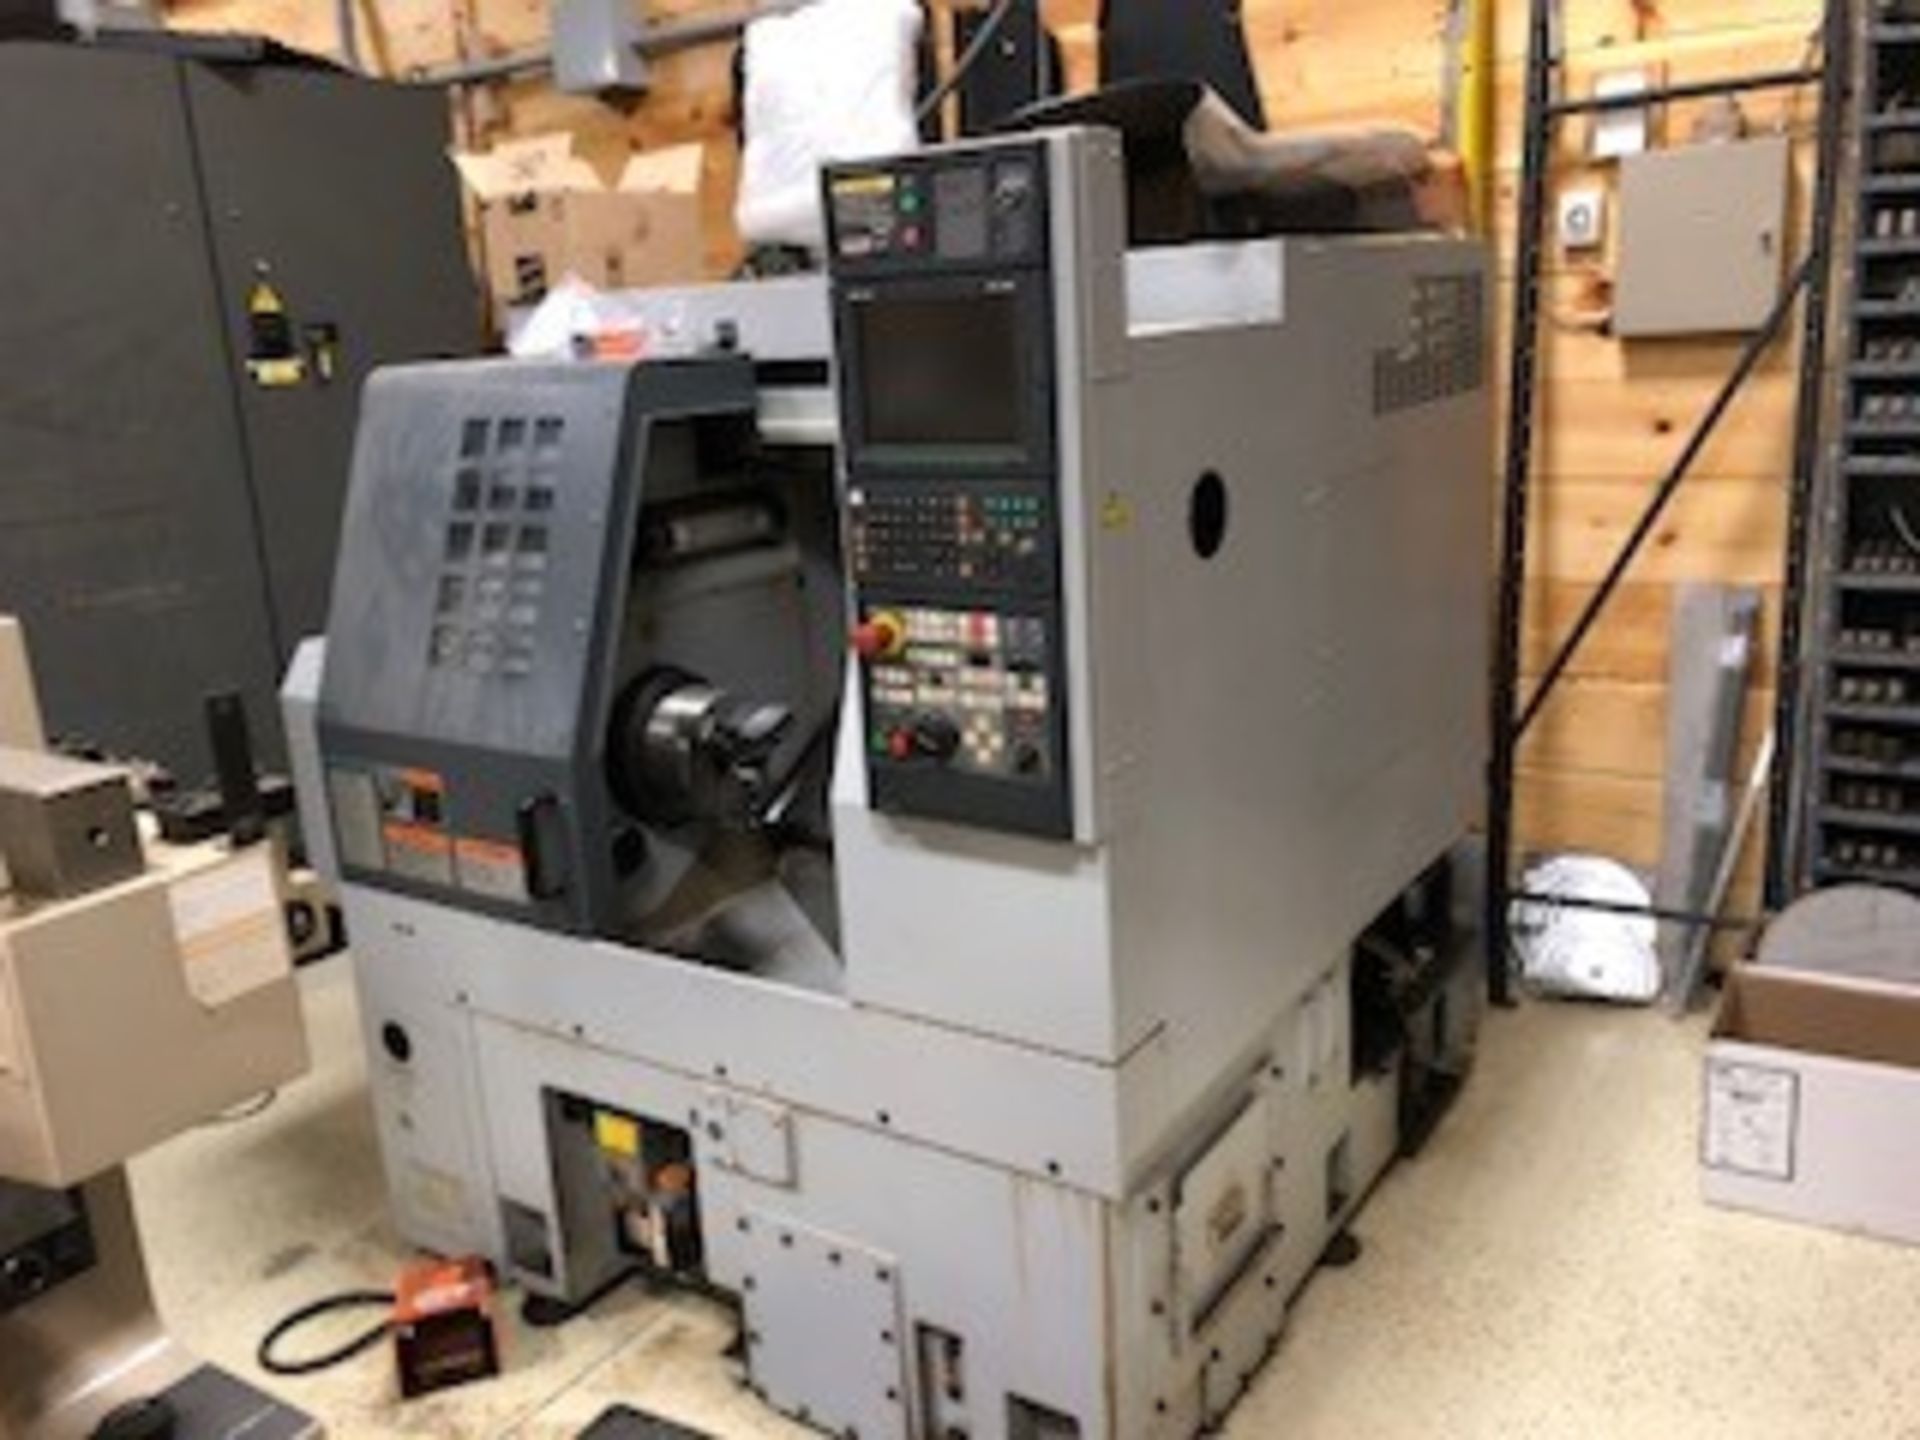 MORI SEIKI CL 2000B CNC LATHE, SN CL201EE2186, YEAR 2005, APPOX. 600 HOURS (UNVERIFIED), LOCATION MI - Image 3 of 6